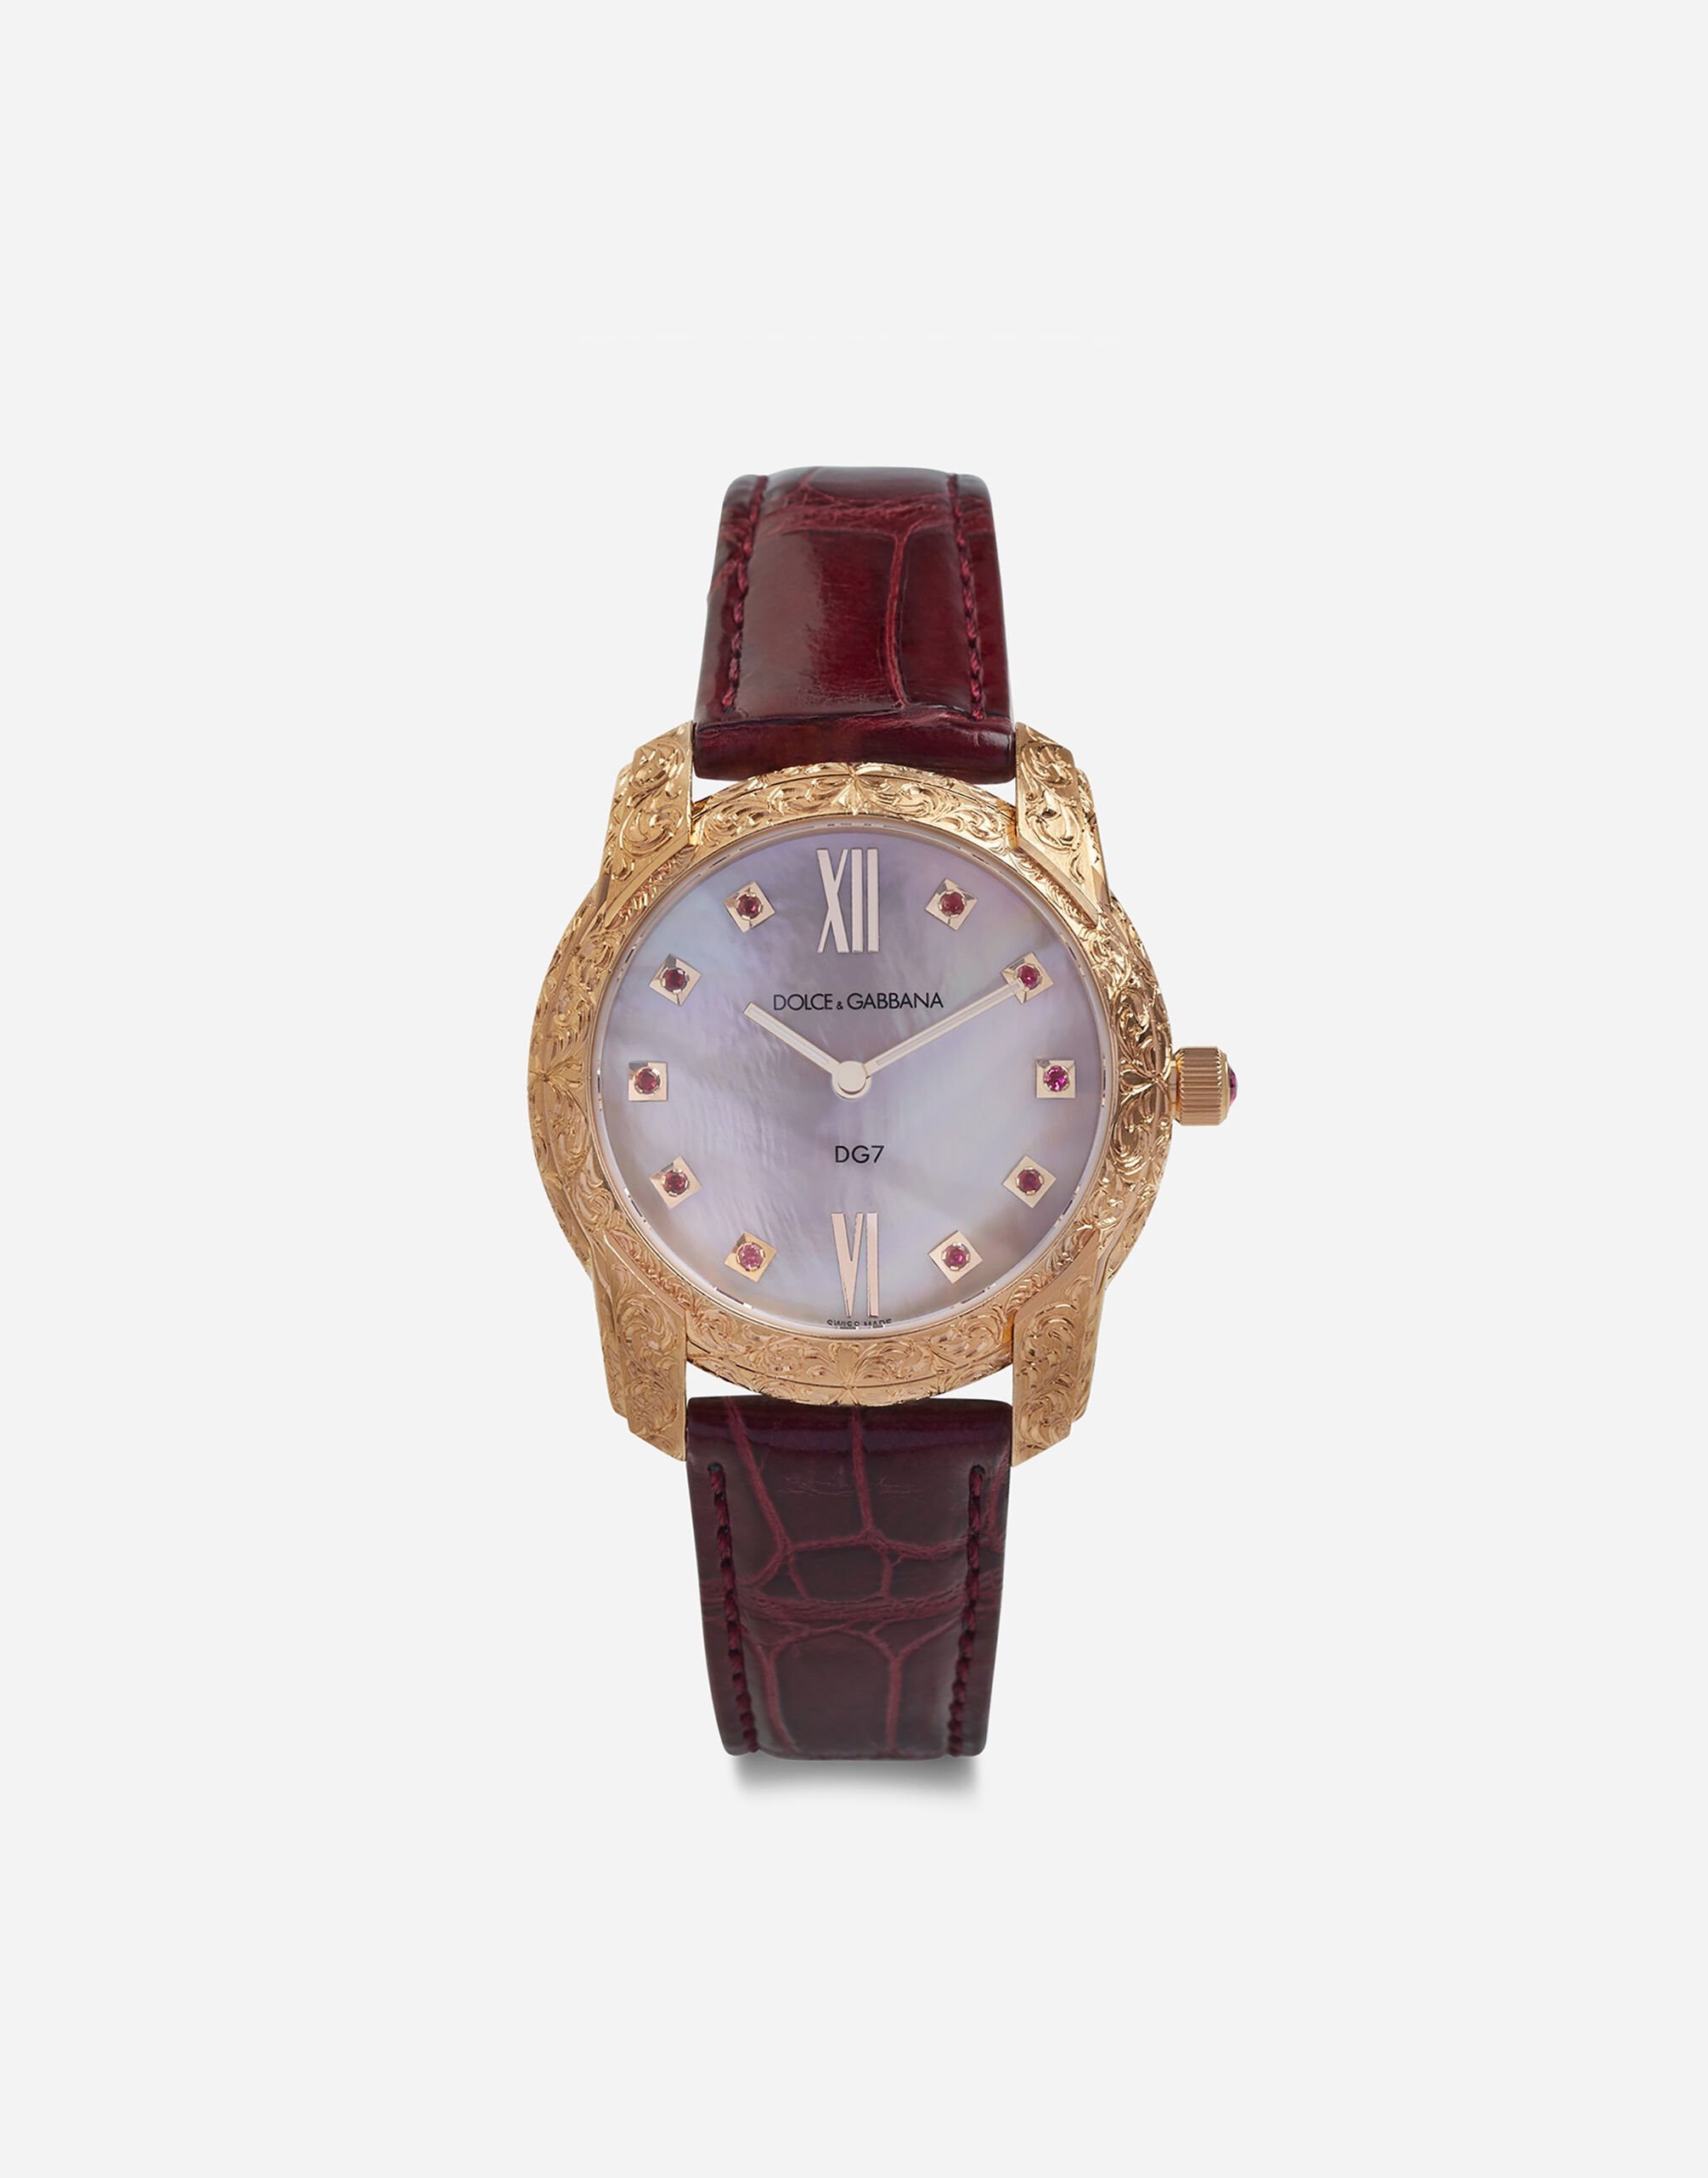 Dolce & Gabbana DG7 Gattopardo watch in red gold with pink mother of pearl and rubies Gold WWLB1GWMIX1